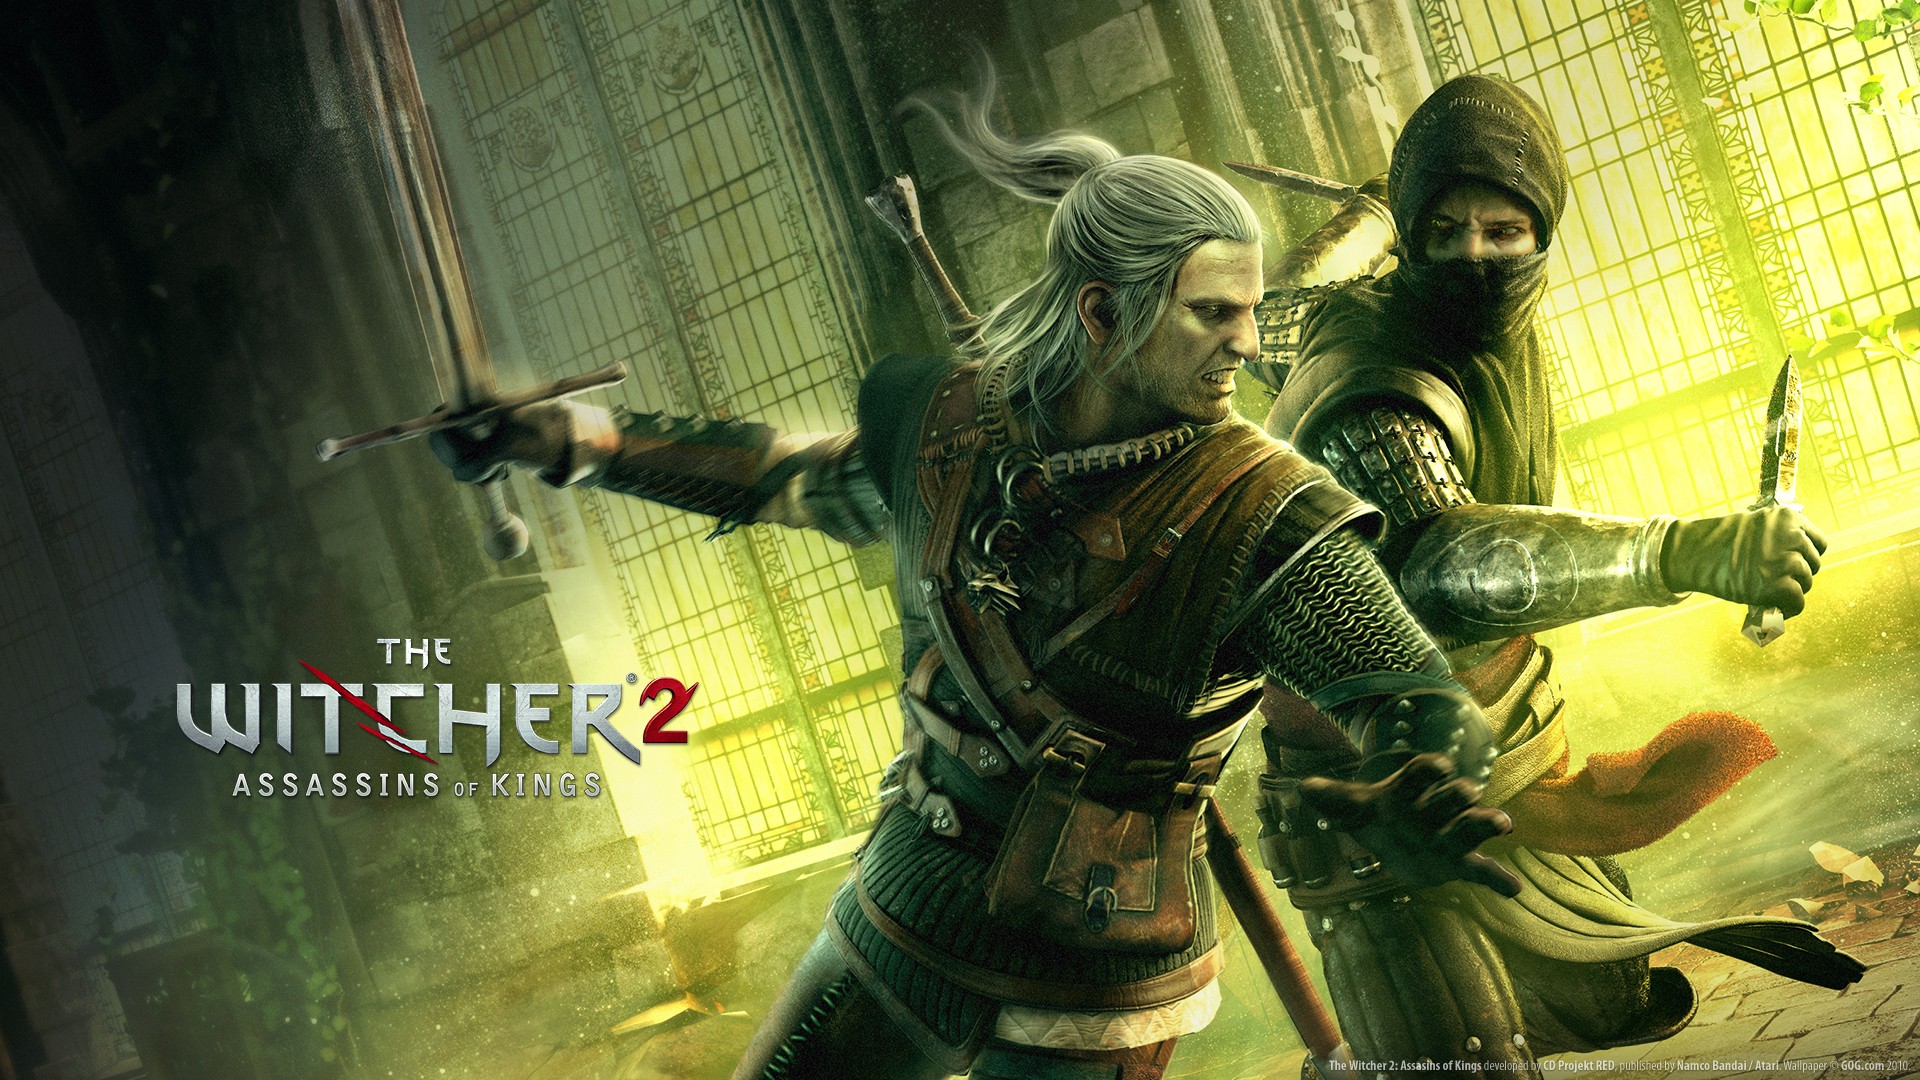 General 1920x1080 The Witcher 2: Assassins of Kings Geralt of Rivia video games video game art PC gaming CD Projekt RED